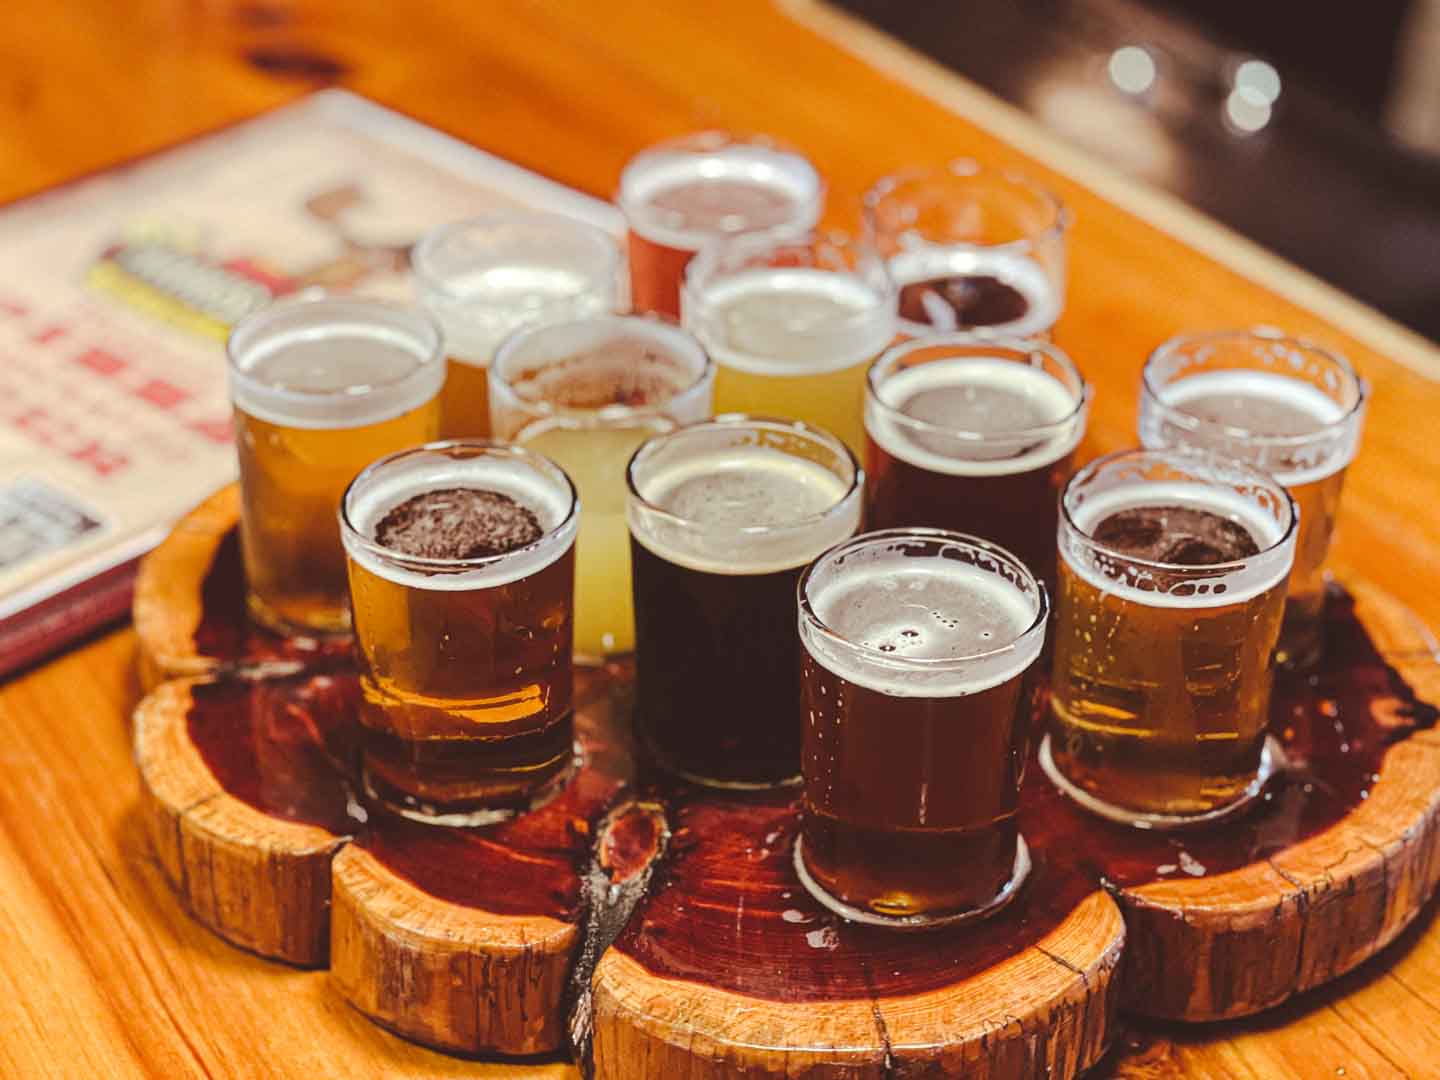 Best Breweries in Wisconsin Dells to Grab a Pint